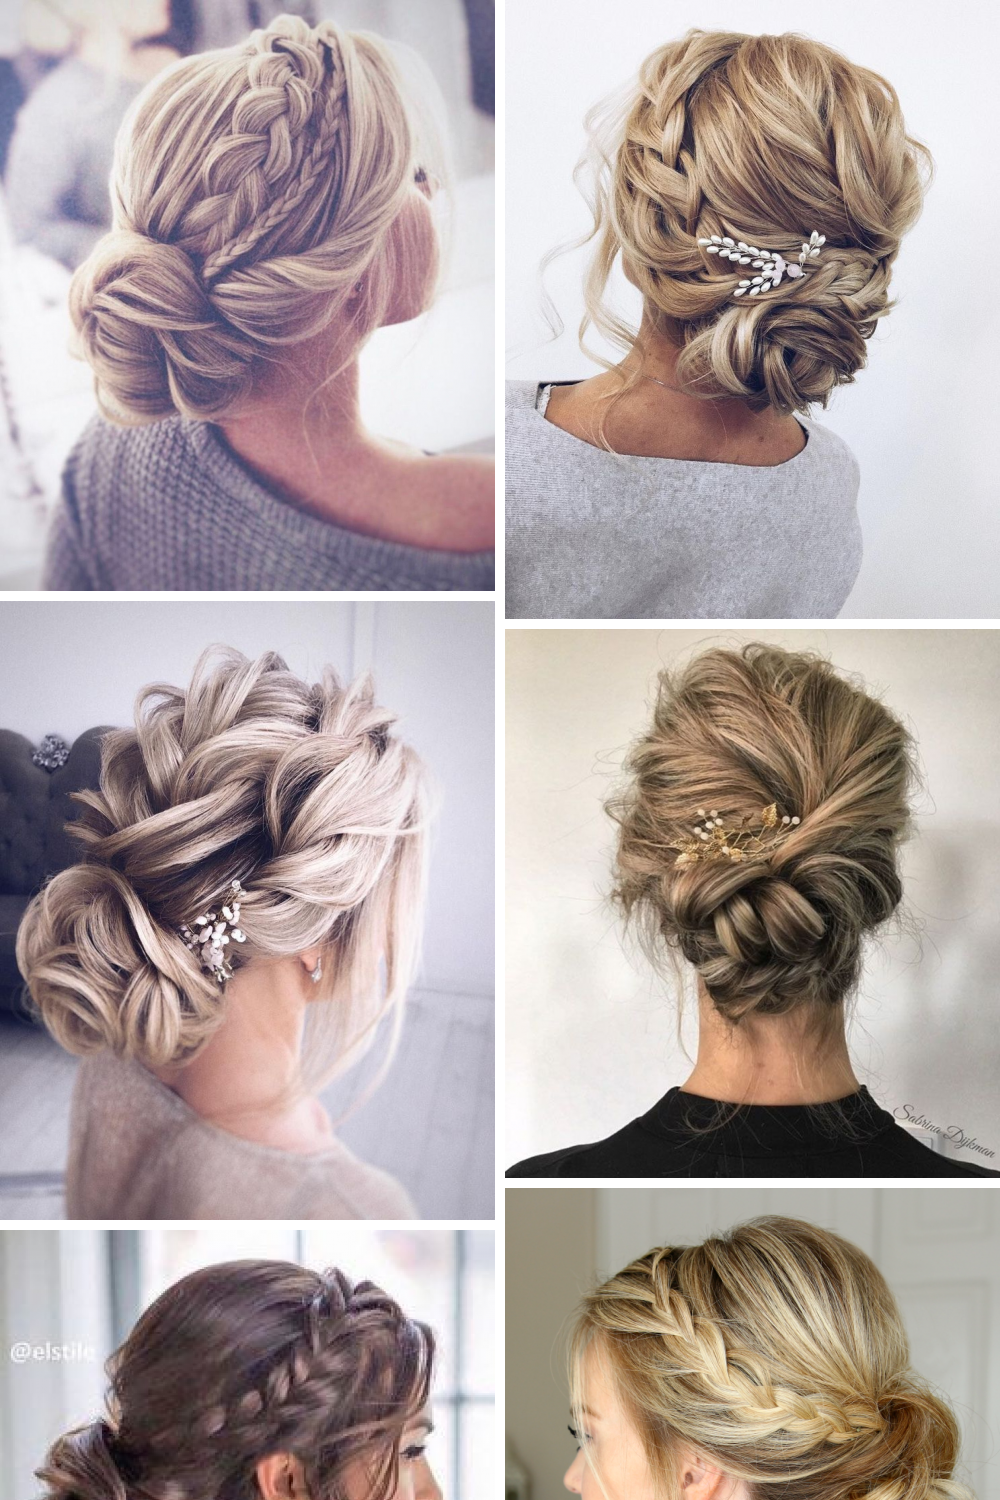 braided-updo-hairstyles-for-short-hair-43 Braided updo hairstyles for short hair